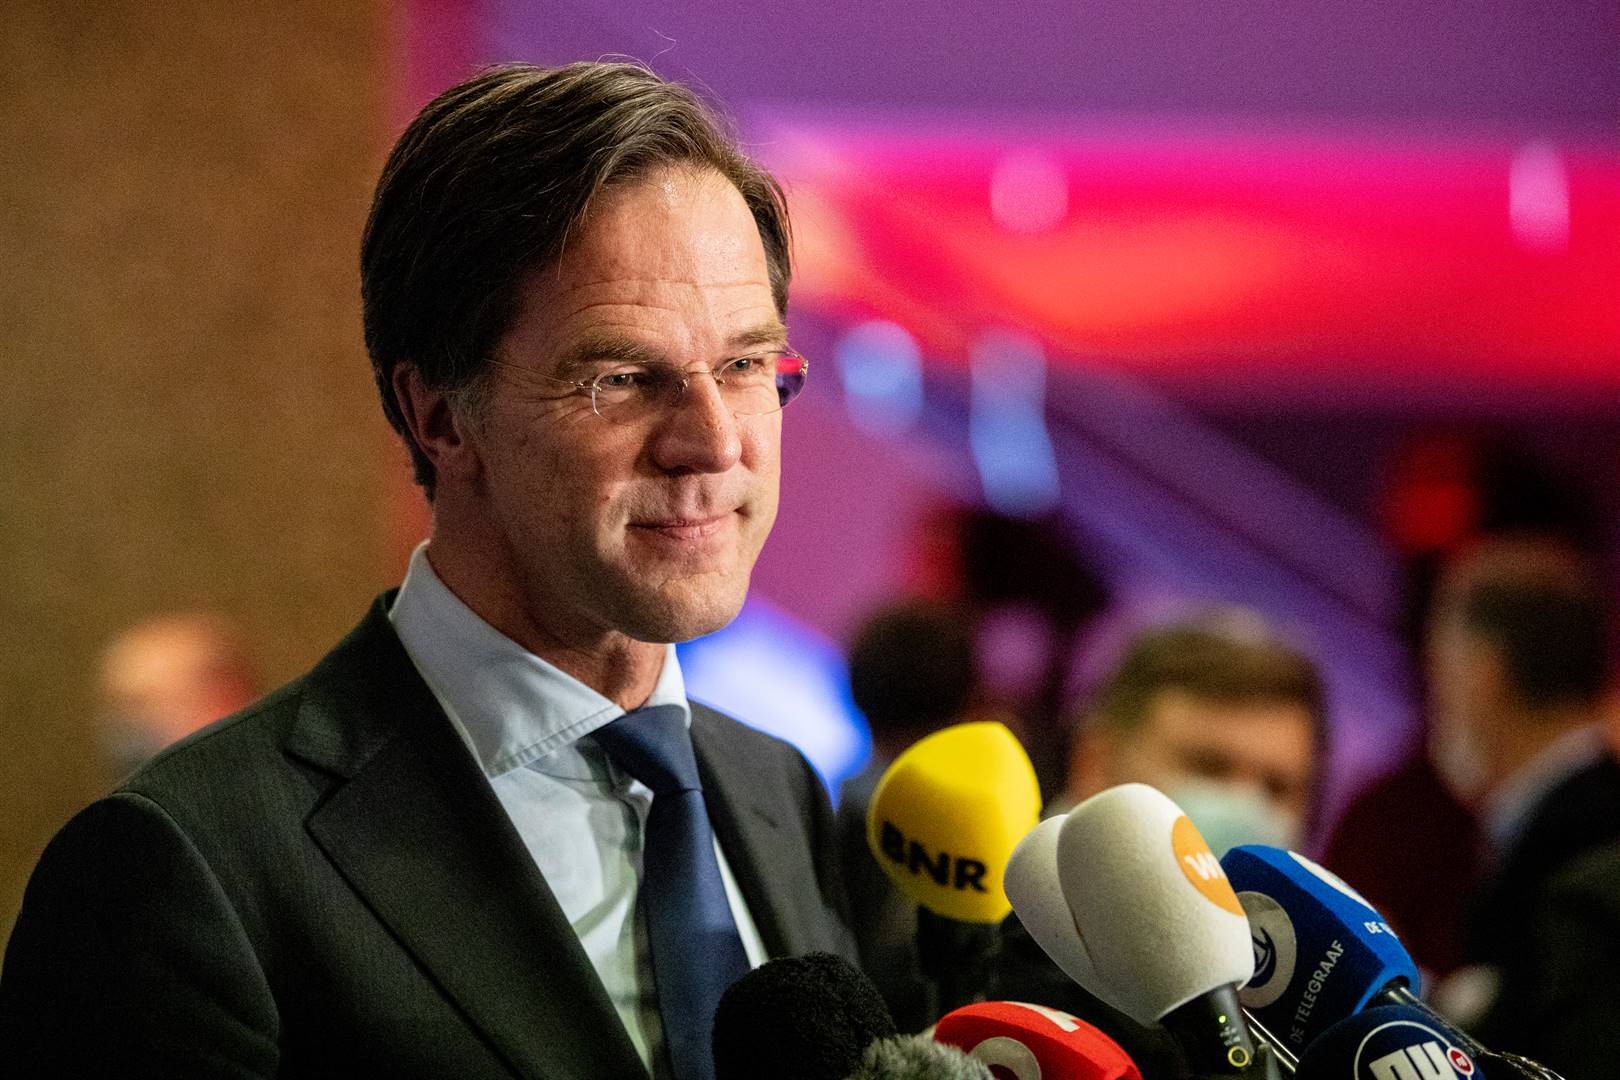 Mark Rutte, Prime Minister of the Netherlands.  Photo: Getty Images